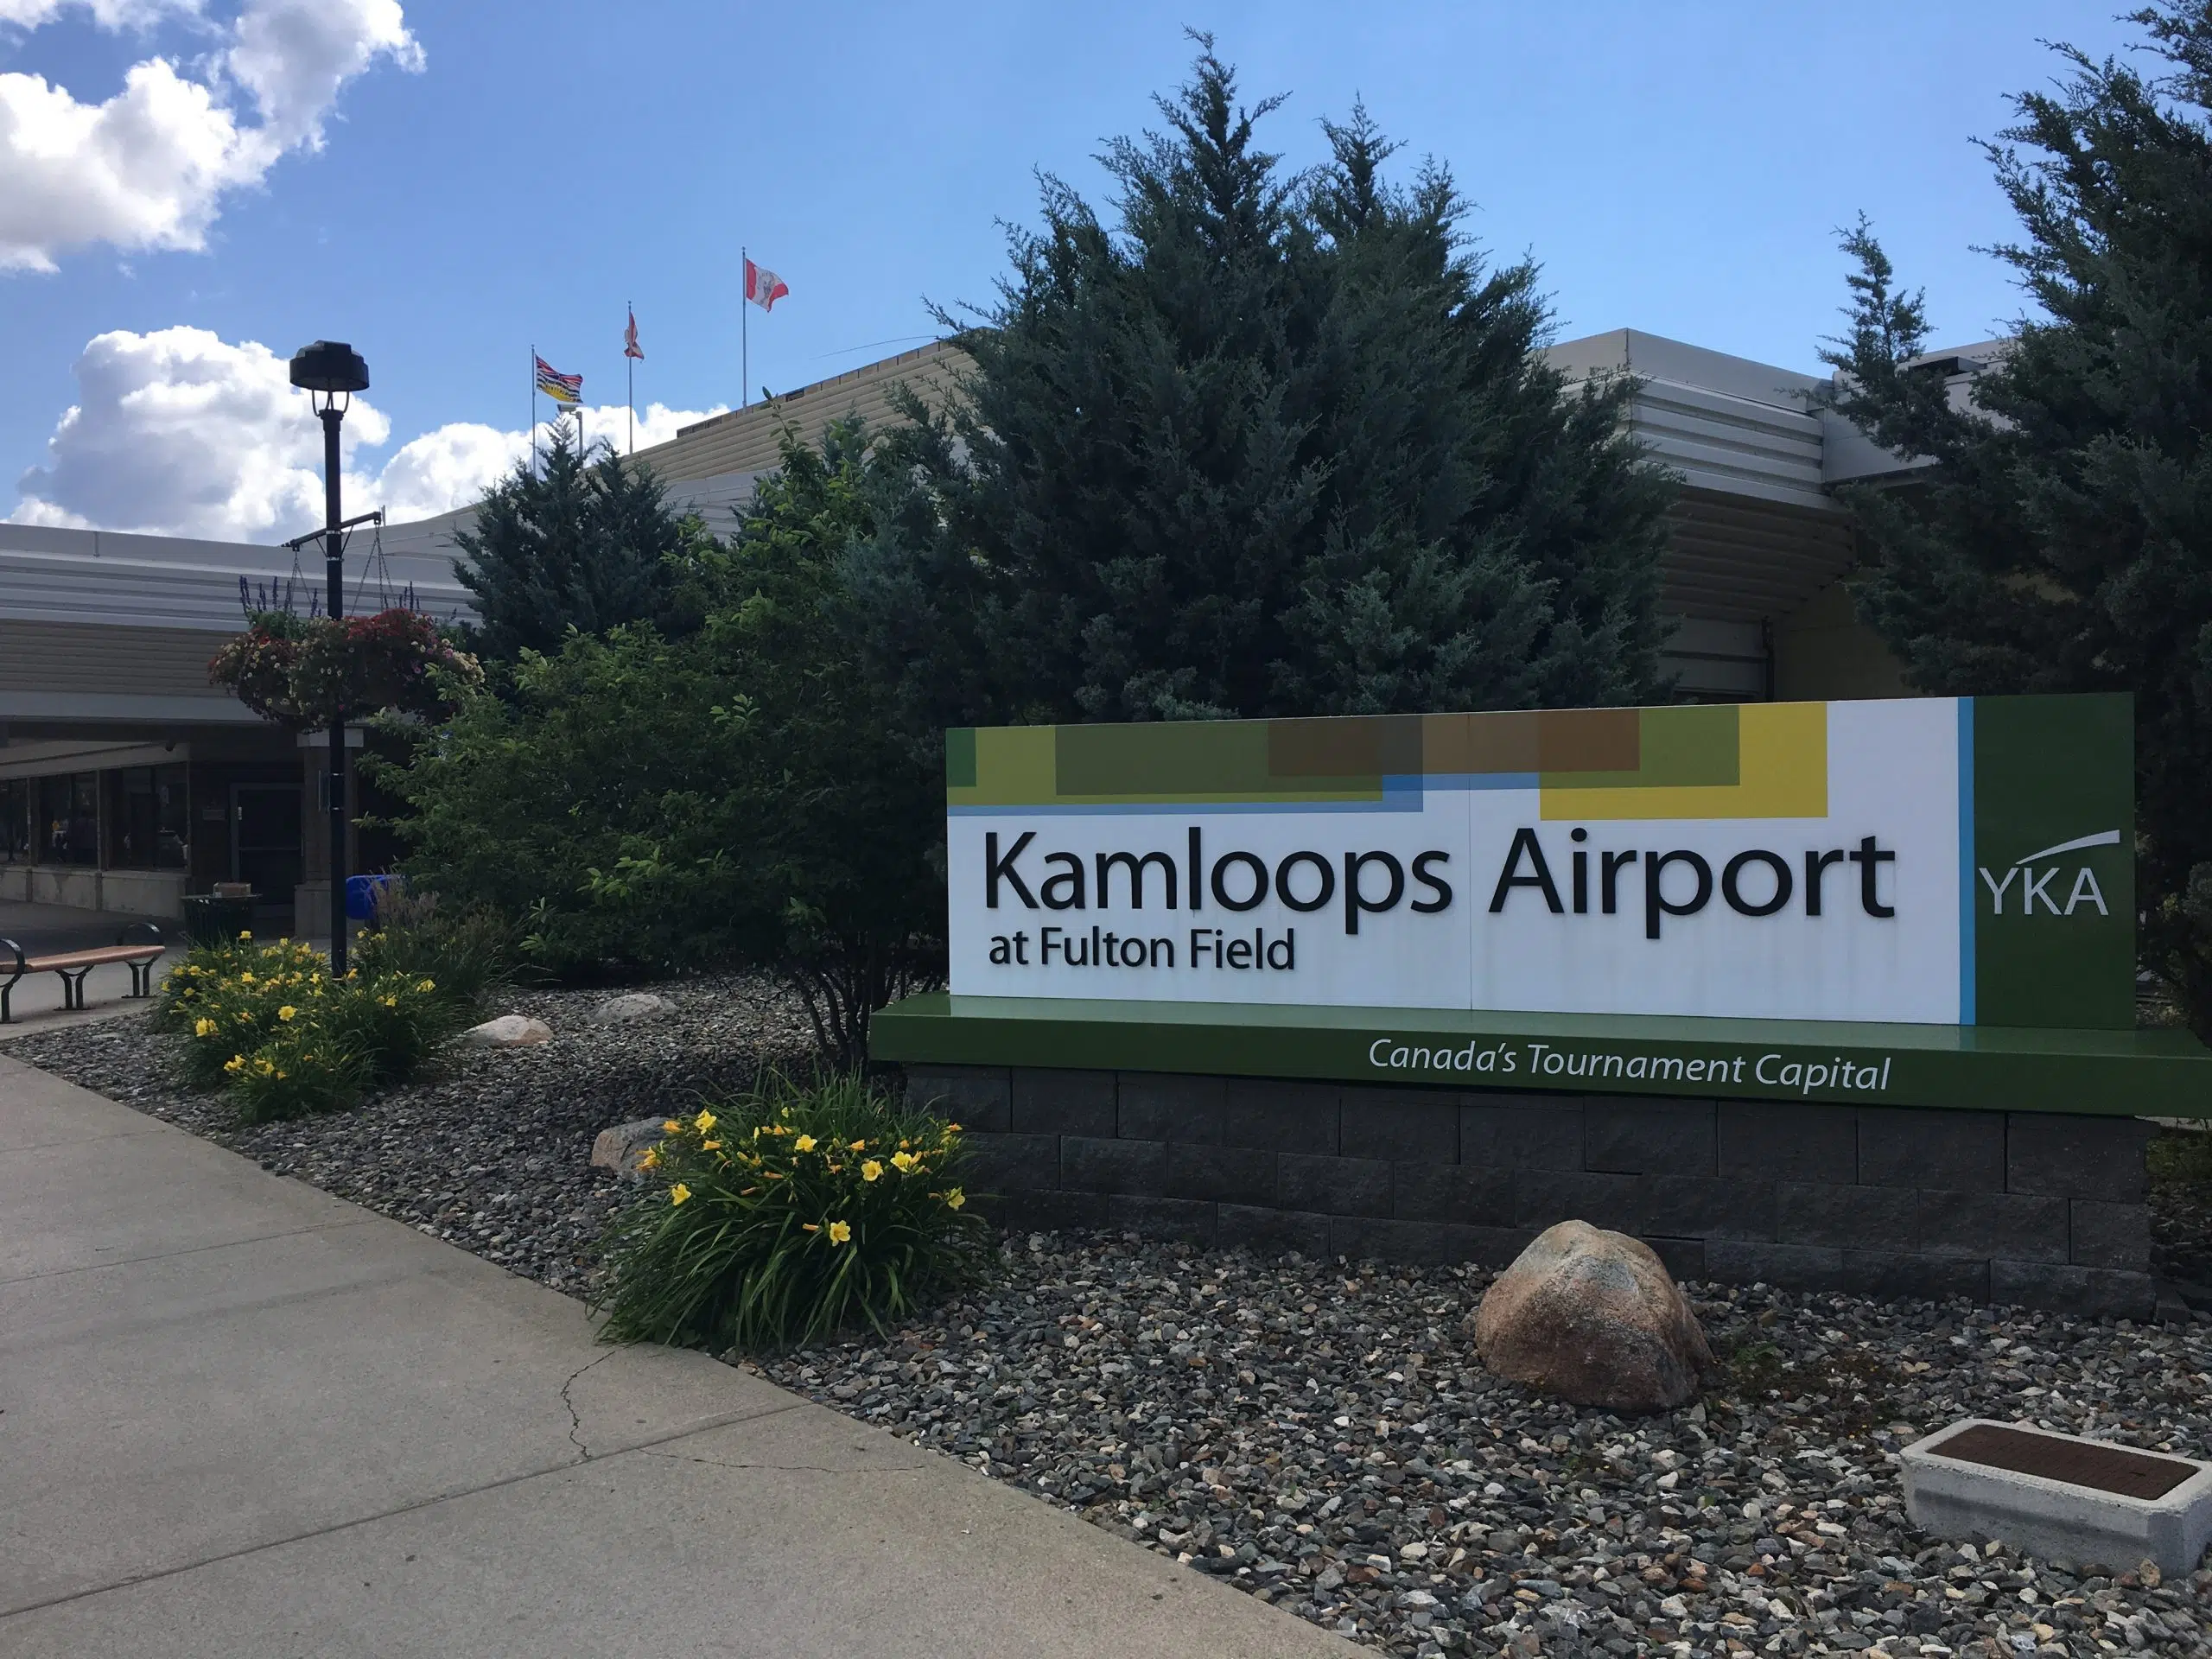 Air Canada temporarily cancels Kamloops flights; WestJet committed to continue amid COVID-19 pandemic